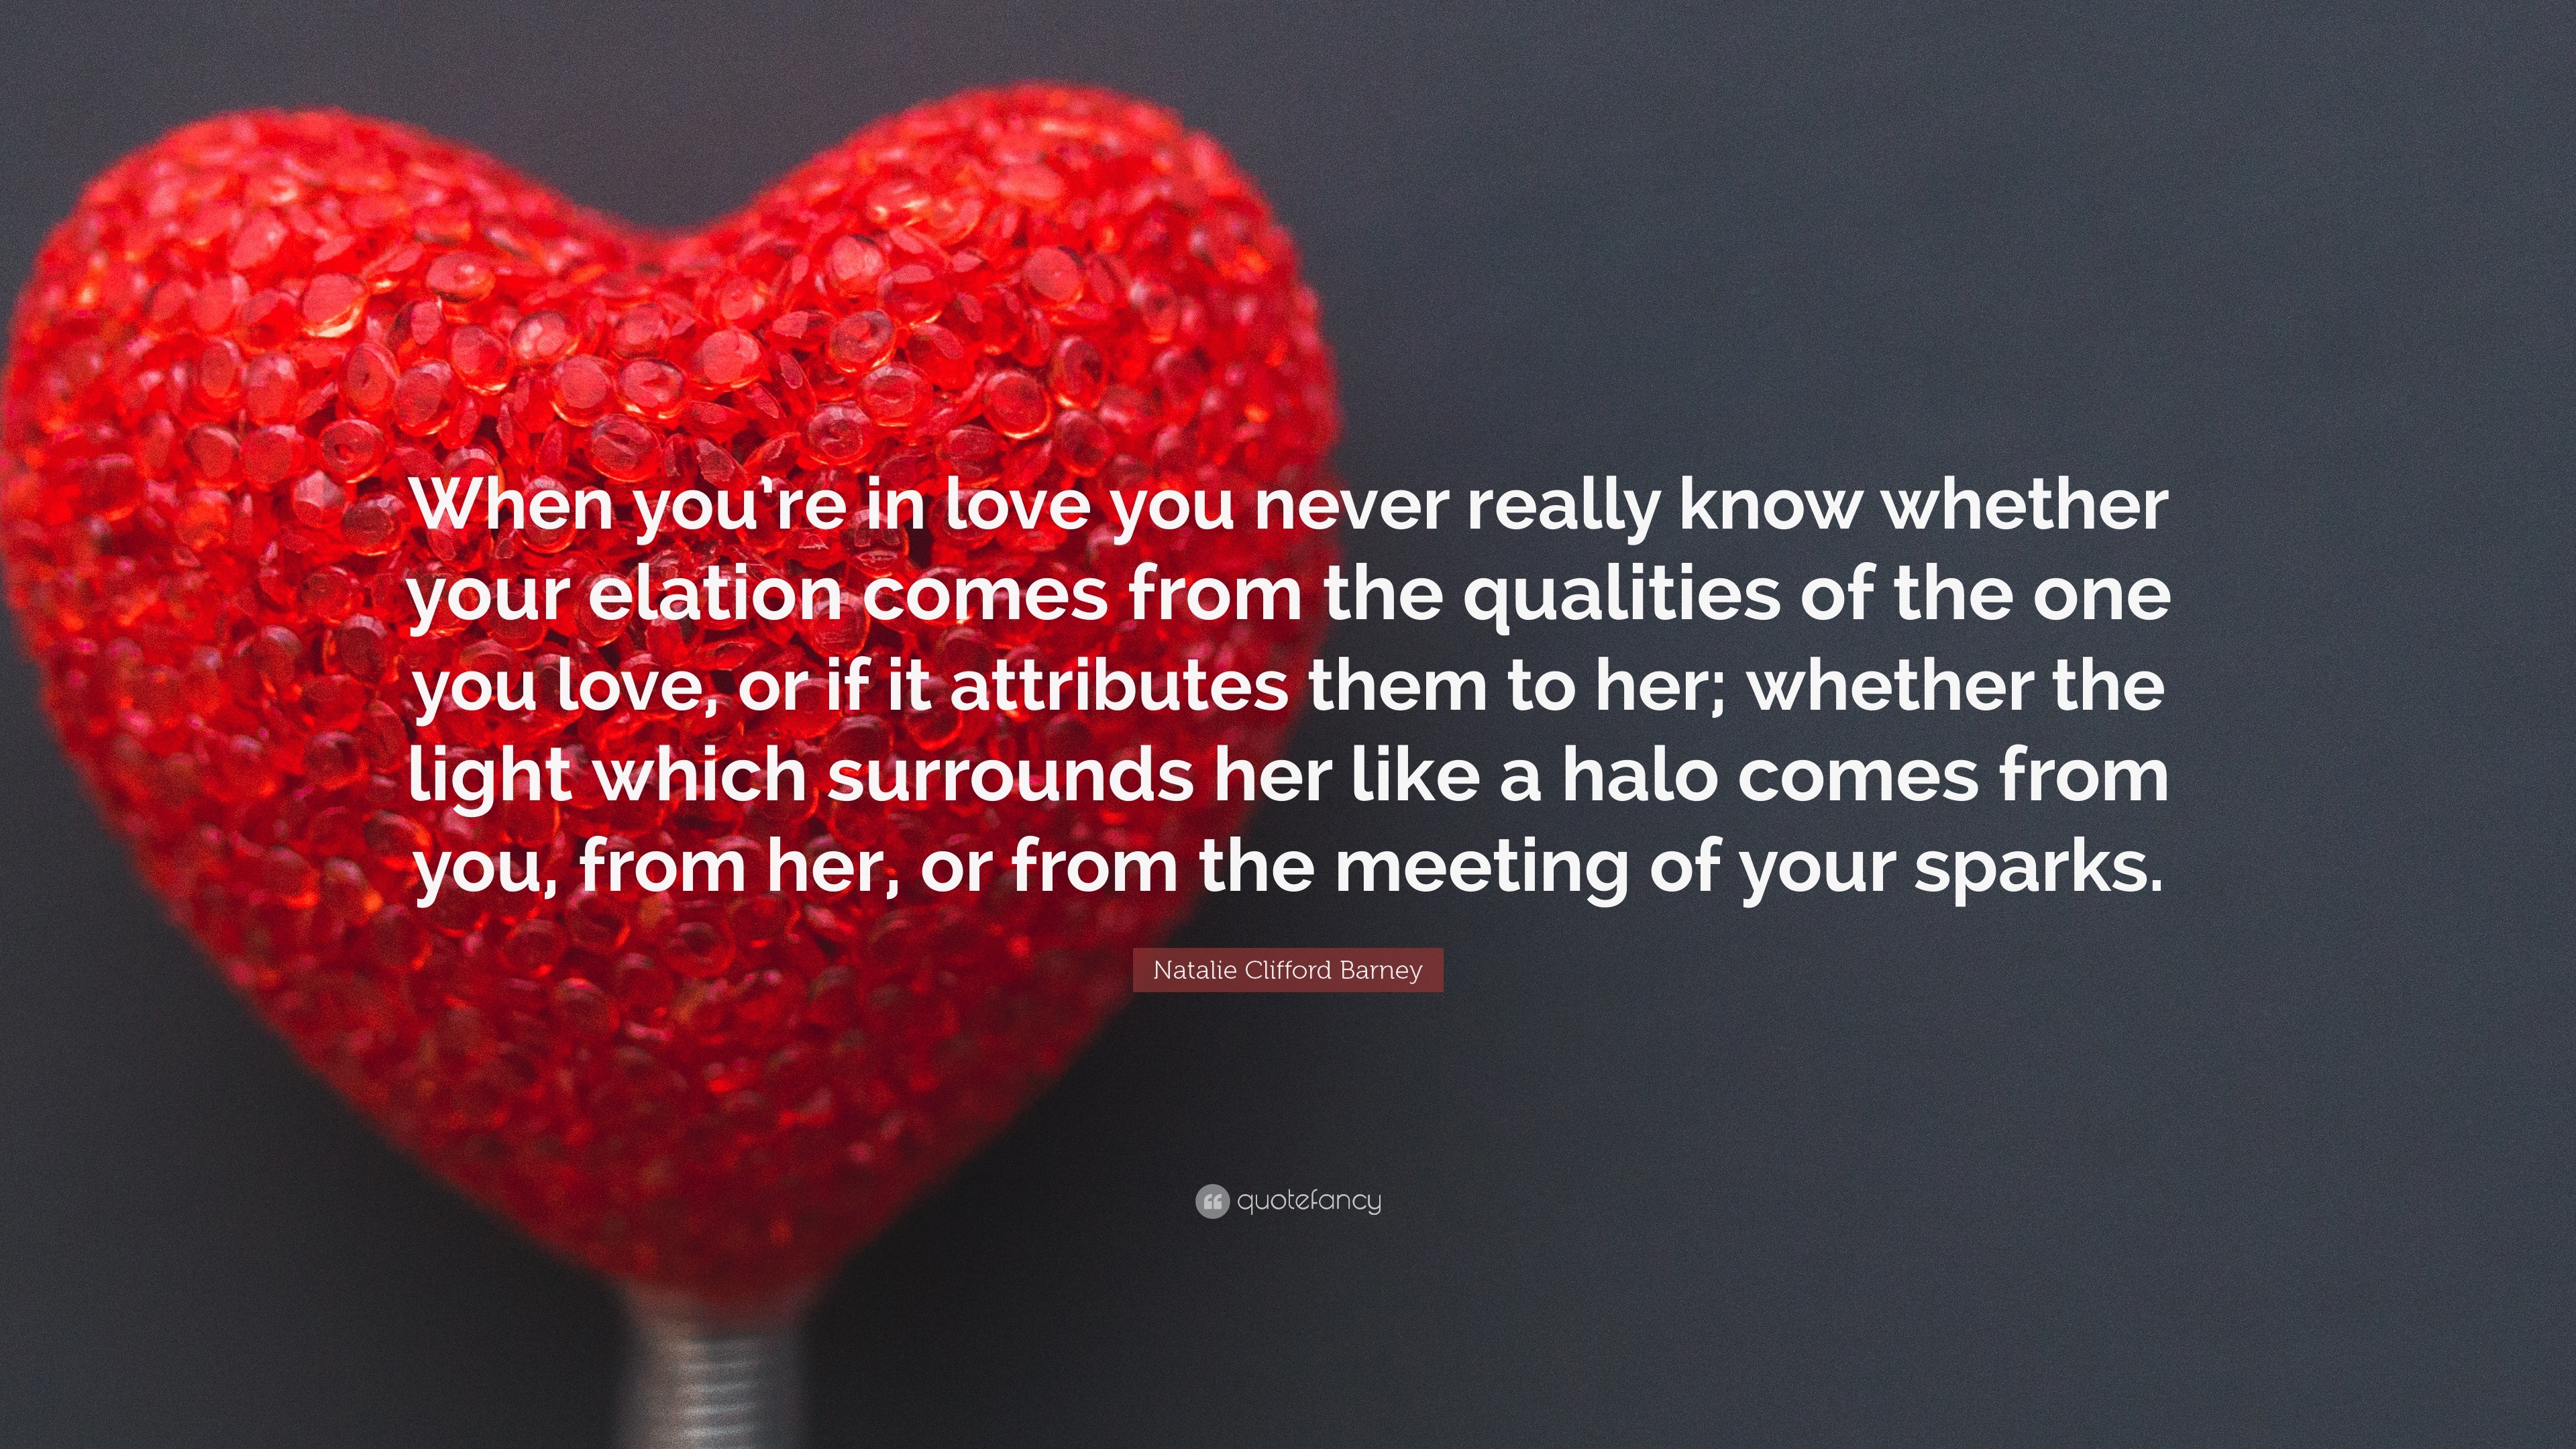 Get ready to ignite your love with these valentines day quotes!